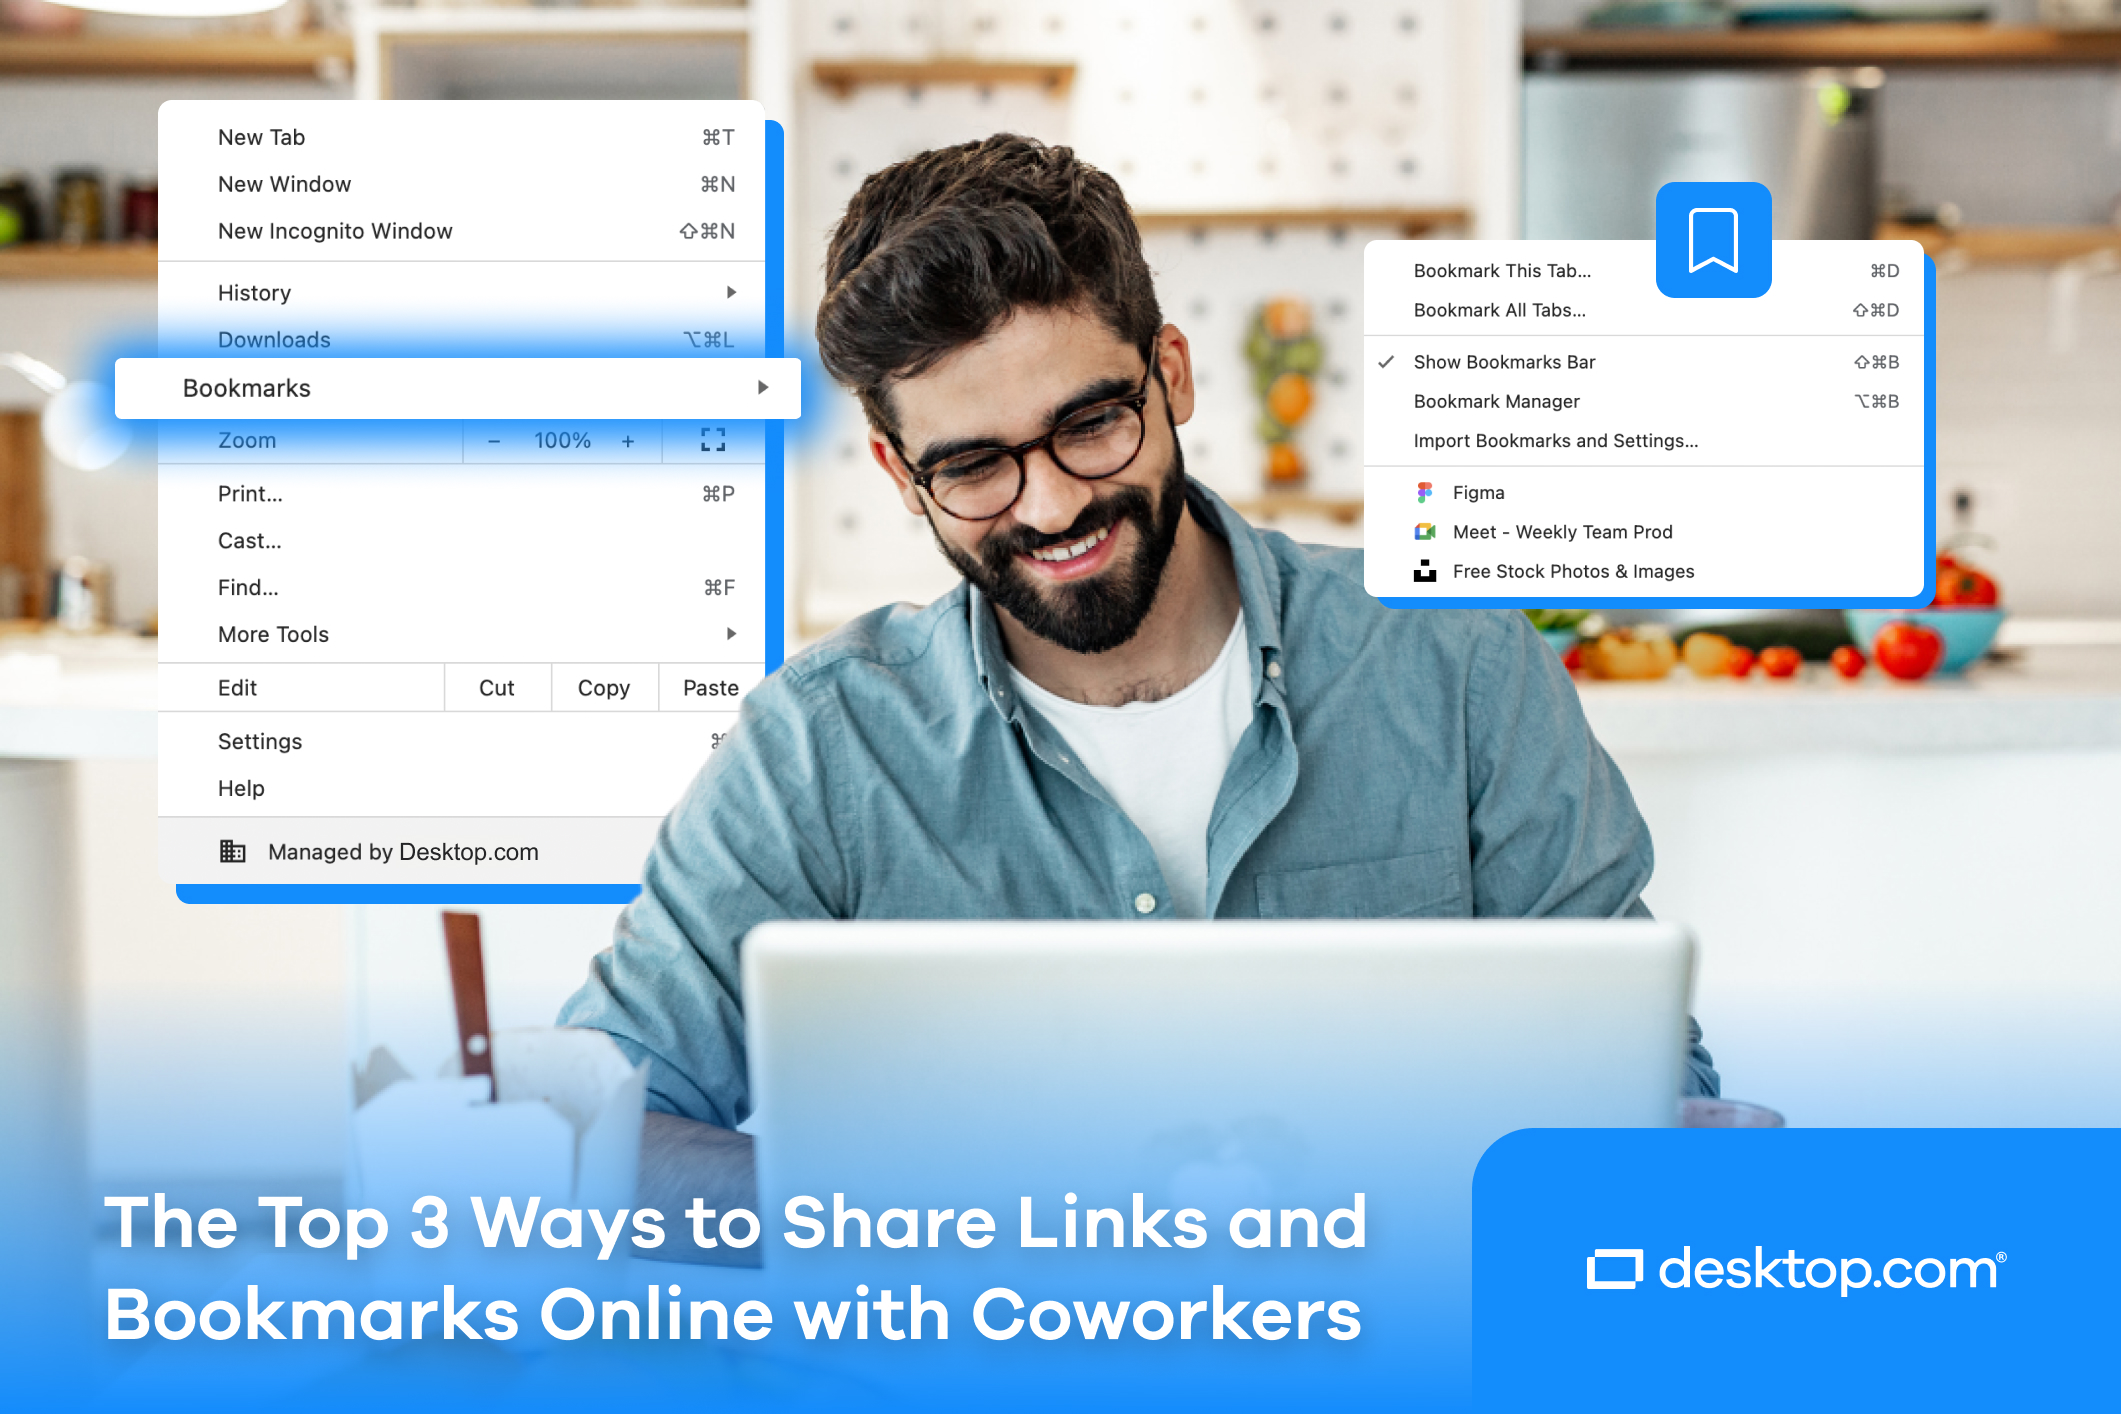 The Top 3 Ways to Share Links and Bookmarks Online with Coworkers